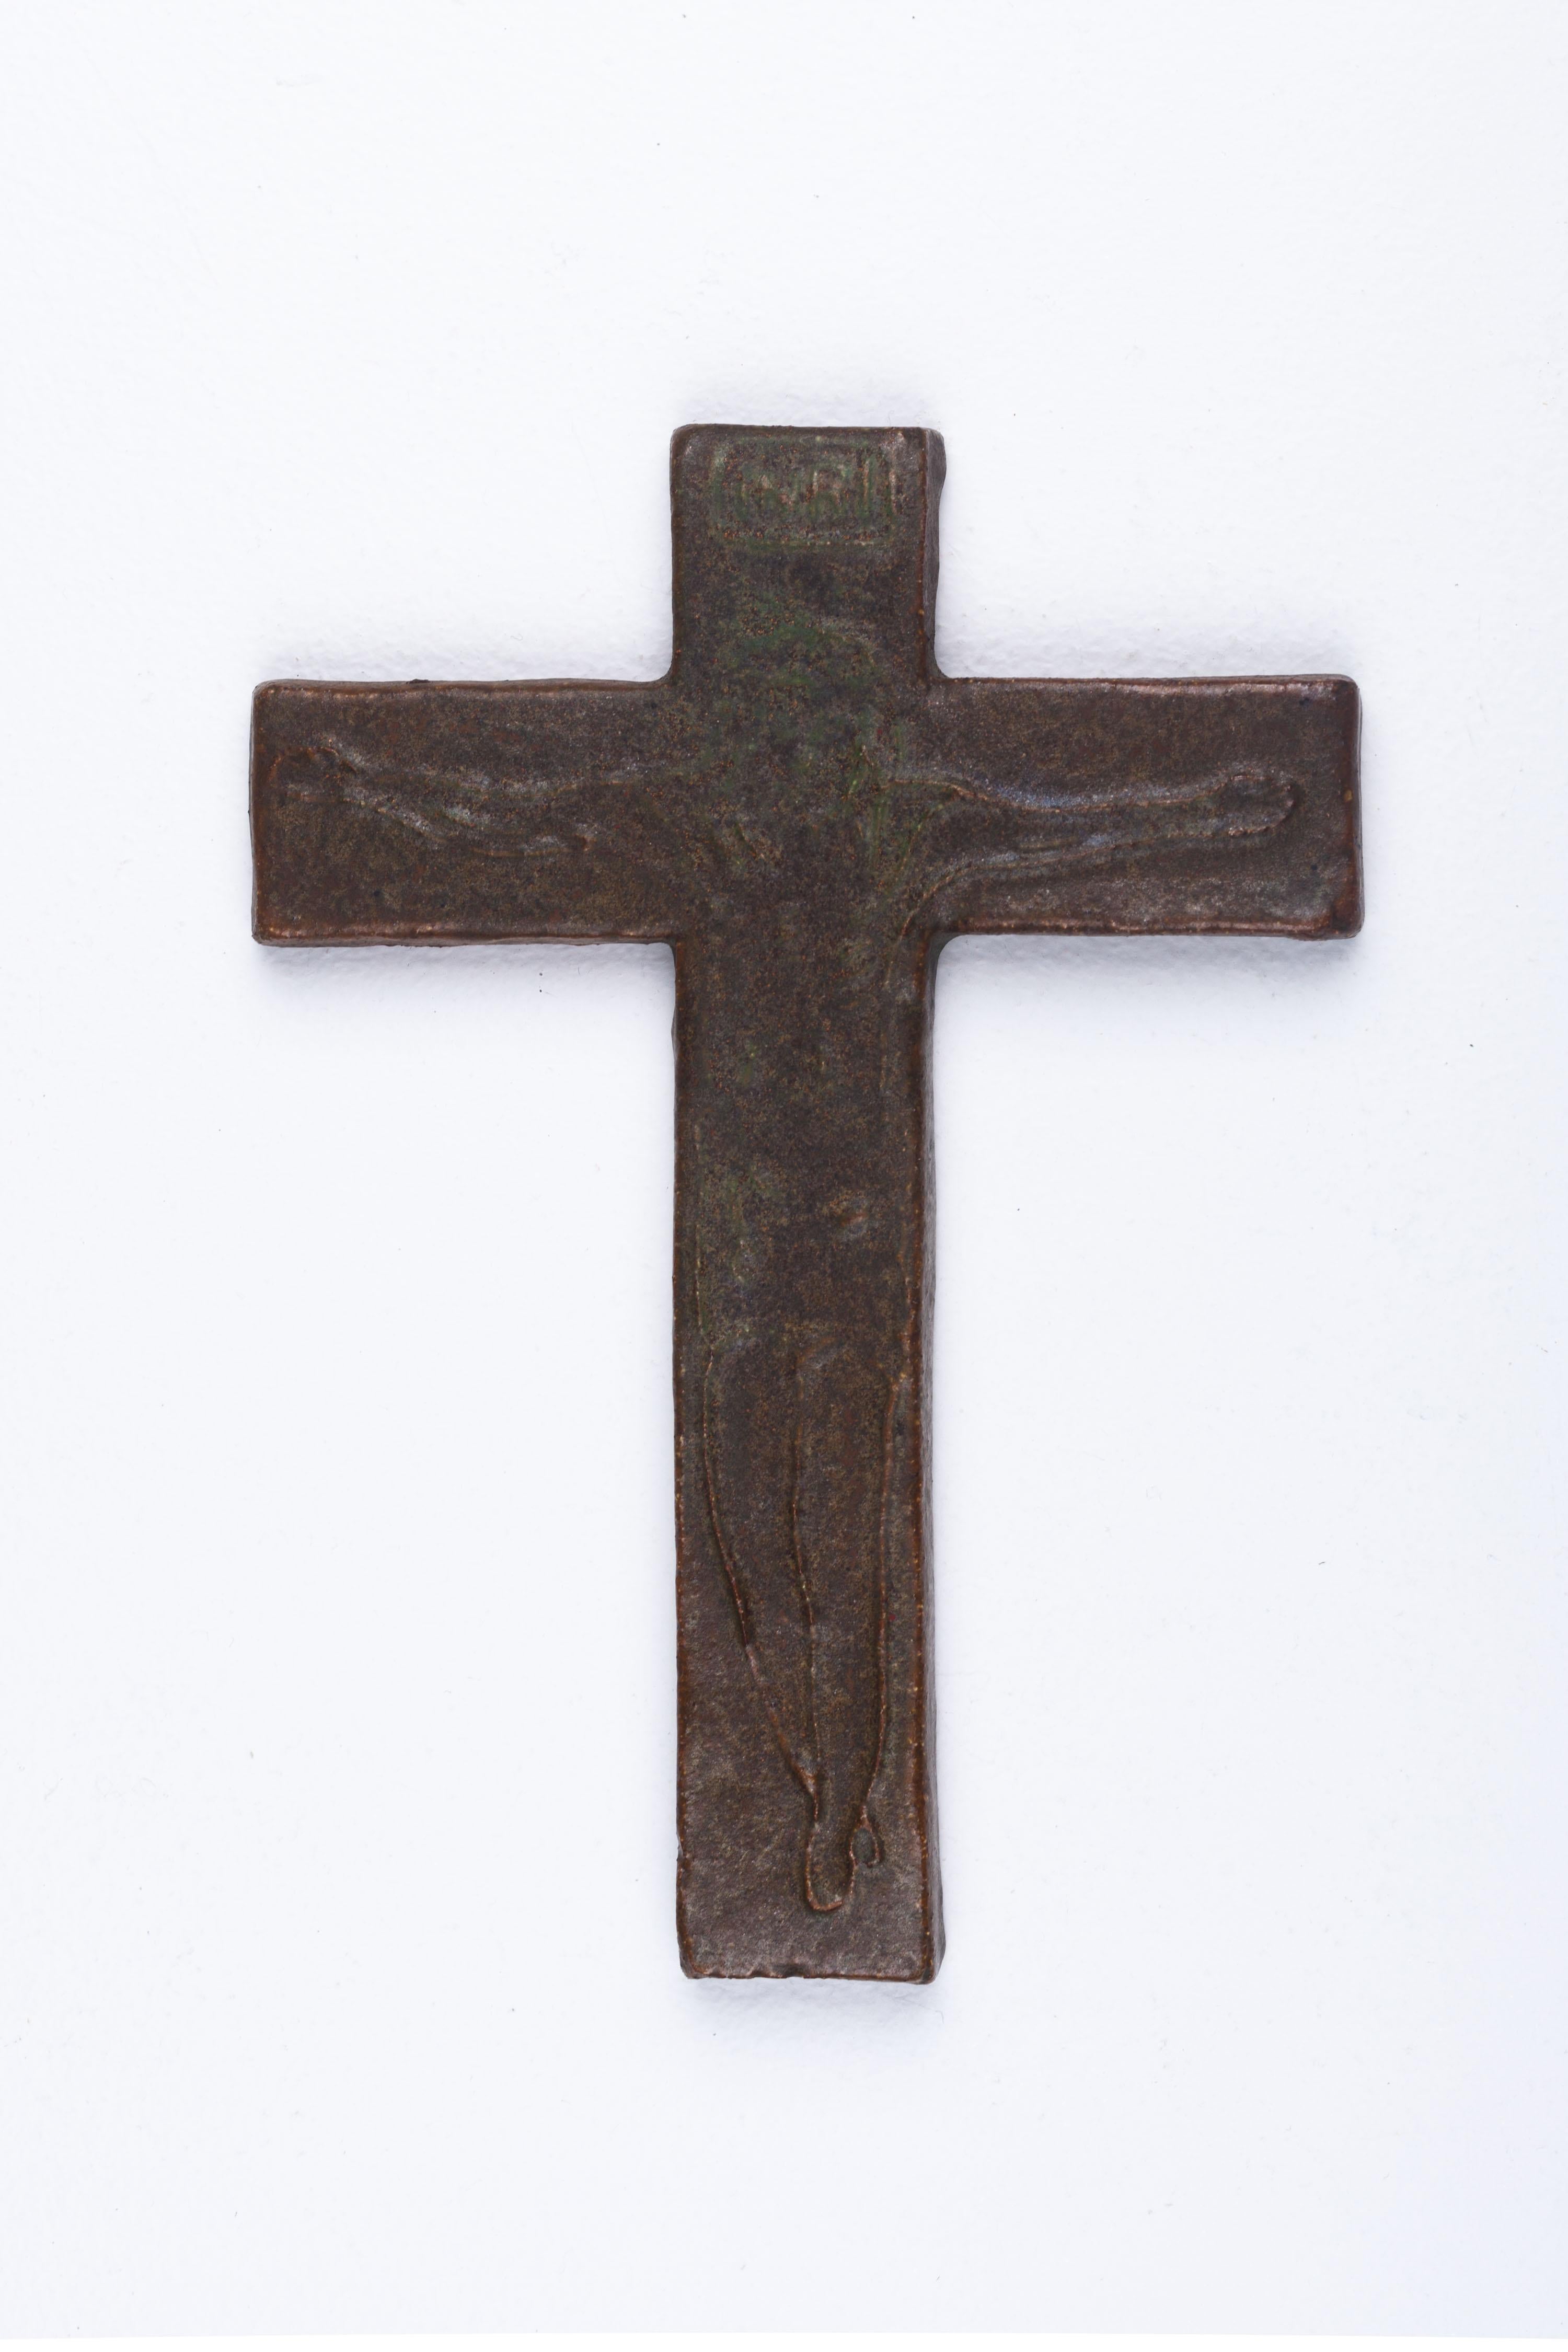 Midcentury European Brown and Green Ceramic Cross Otherworldly Christ Figure For Sale 1